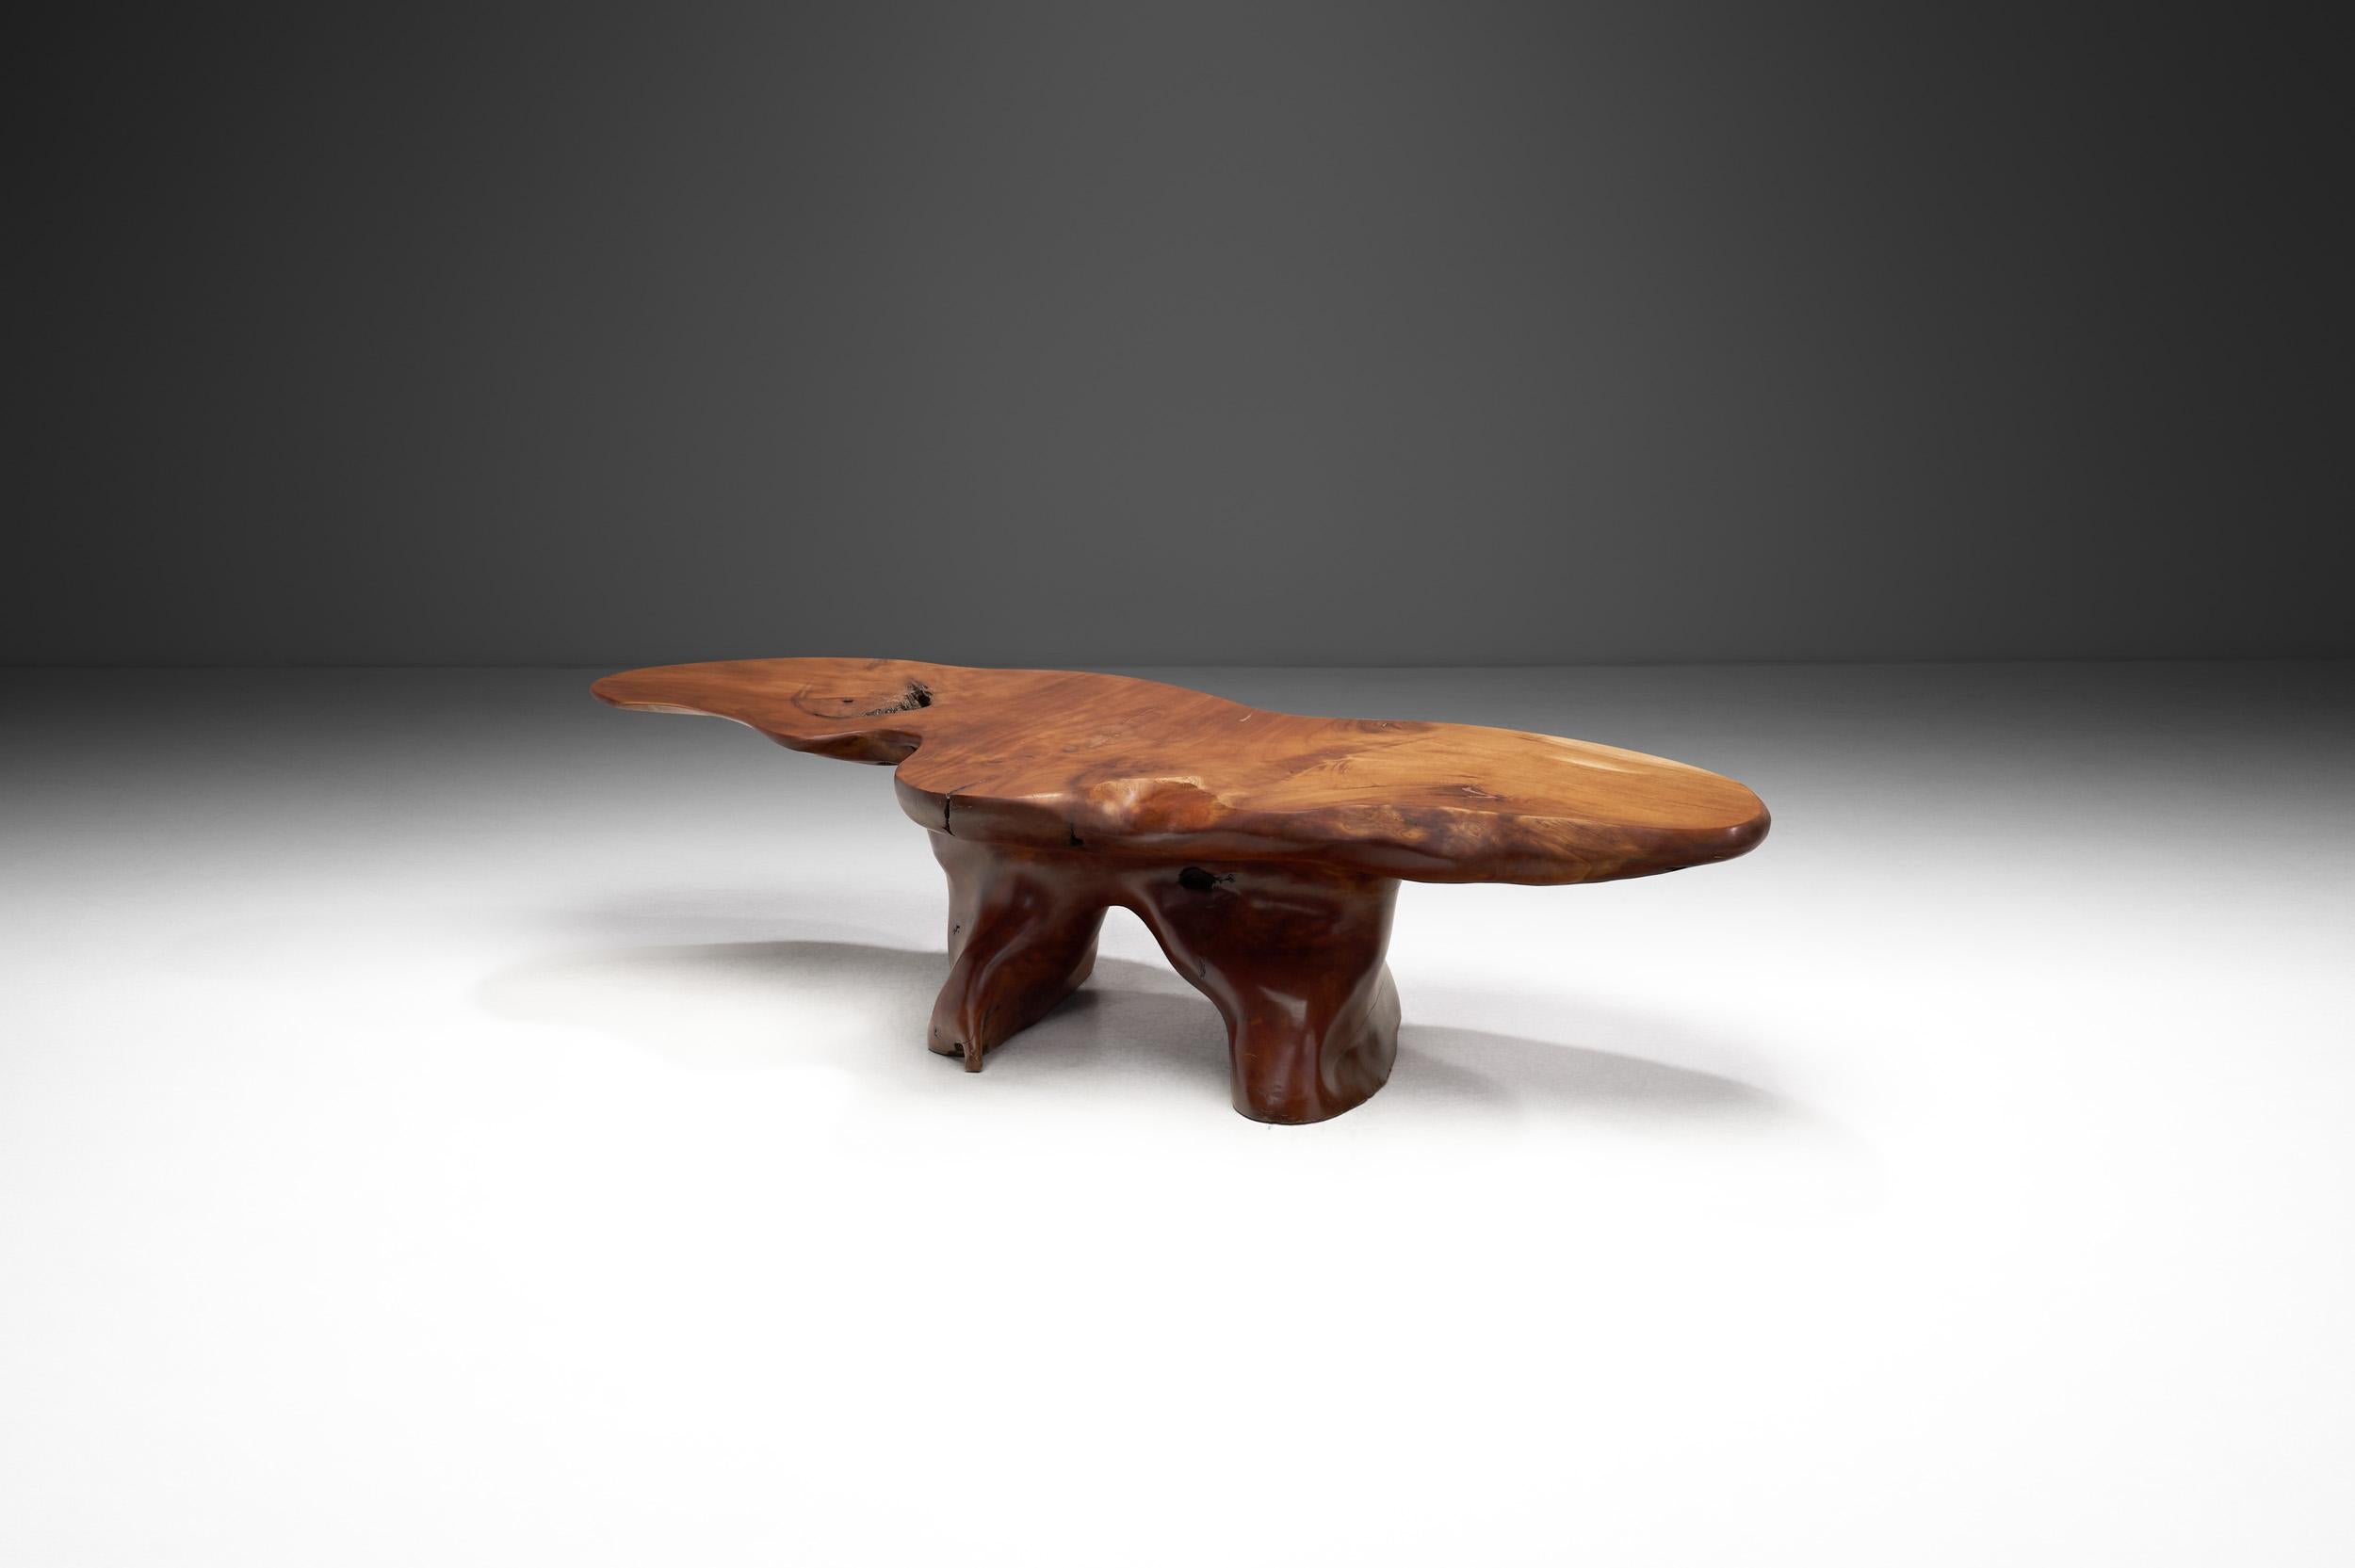 Burl wood furniture is one of those design moments that seems to last forever—and with good reason. Popularized in the Art Deco and Hollywood Regency eras (and again in the 1970s), burl wood is having a major resurgence in modern interior